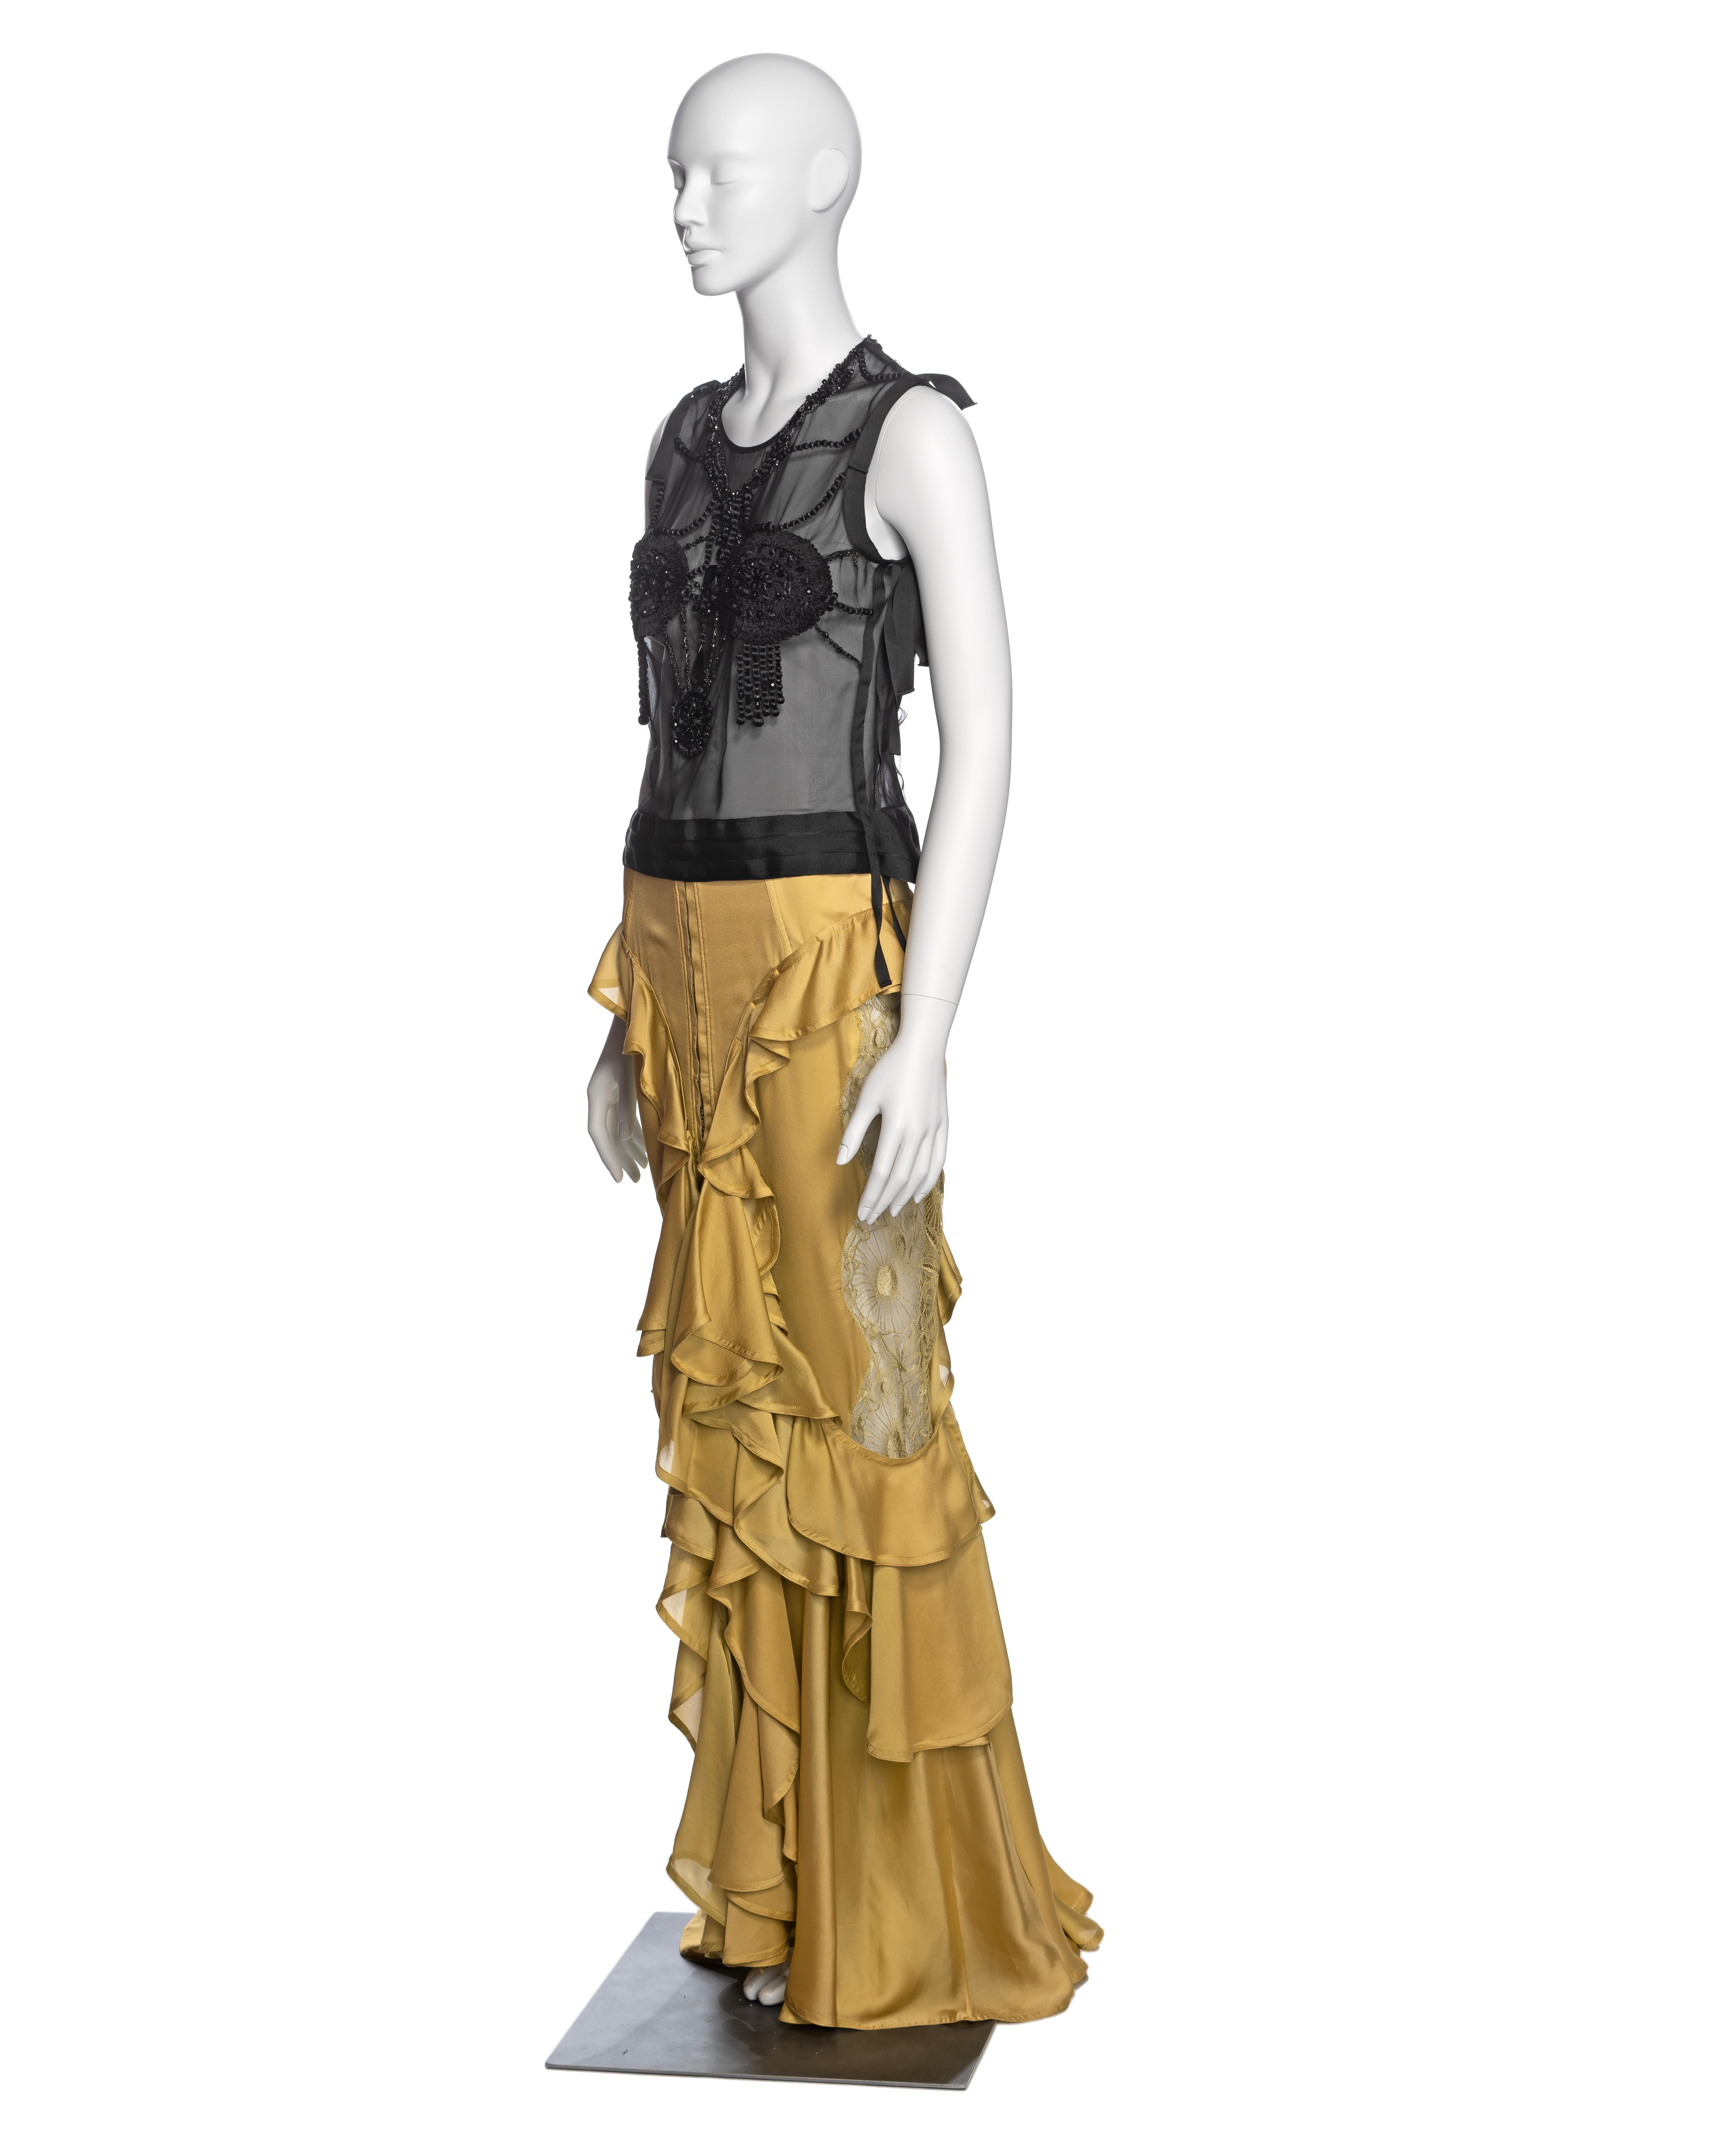 Yves Saint Laurent by Tom Ford Embellished Top and Silk Skirt Ensemble, FW 2003 For Sale 10